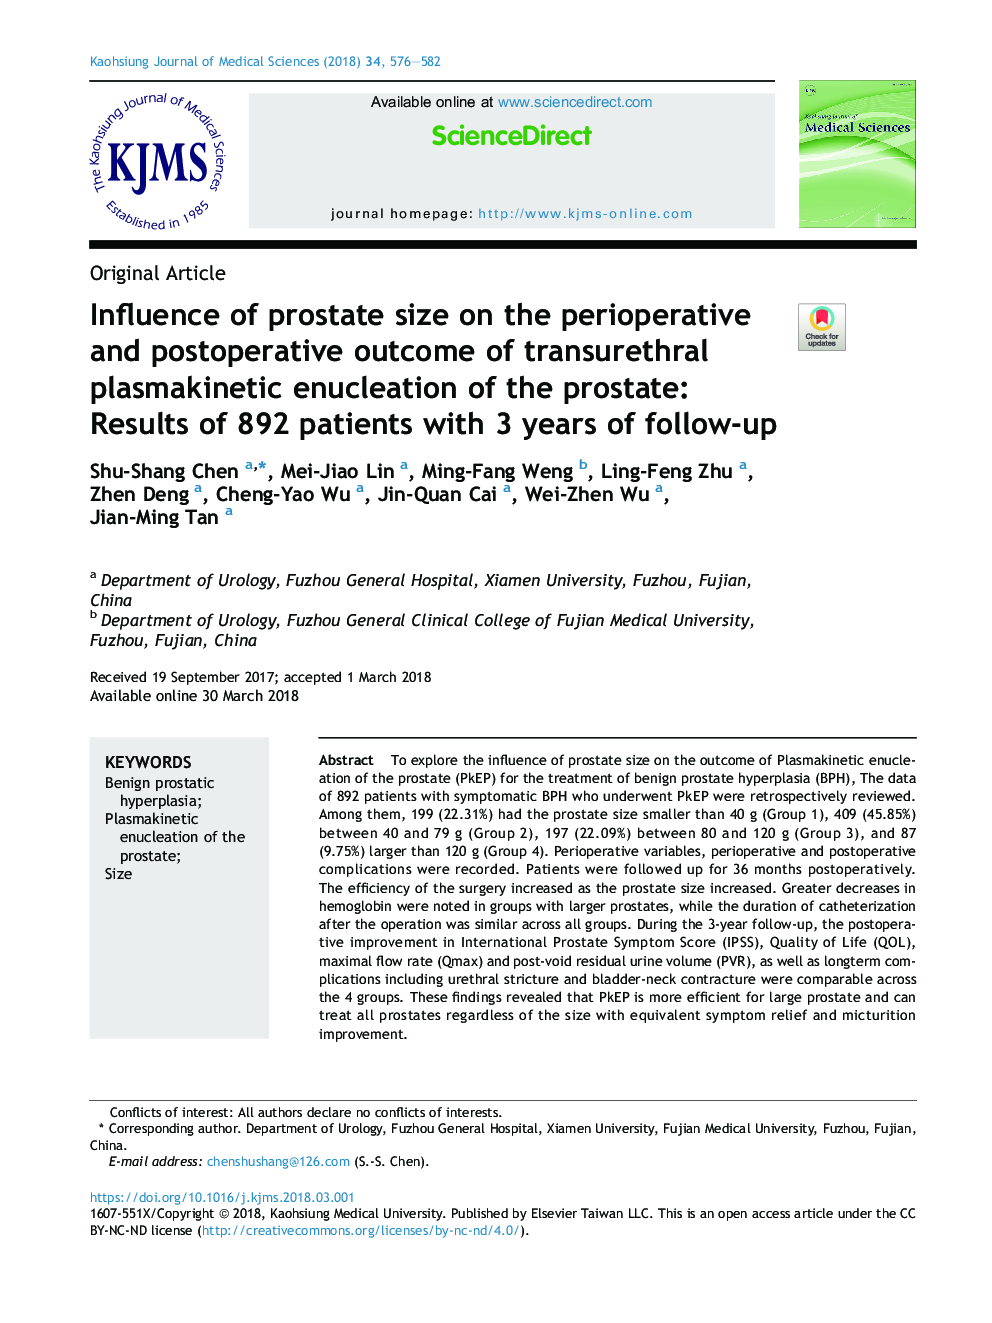 Influence of prostate size on the perioperative and postoperative outcome of transurethral plasmakinetic enucleation of the prostate: Results of 892 patients with 3 years of follow-up